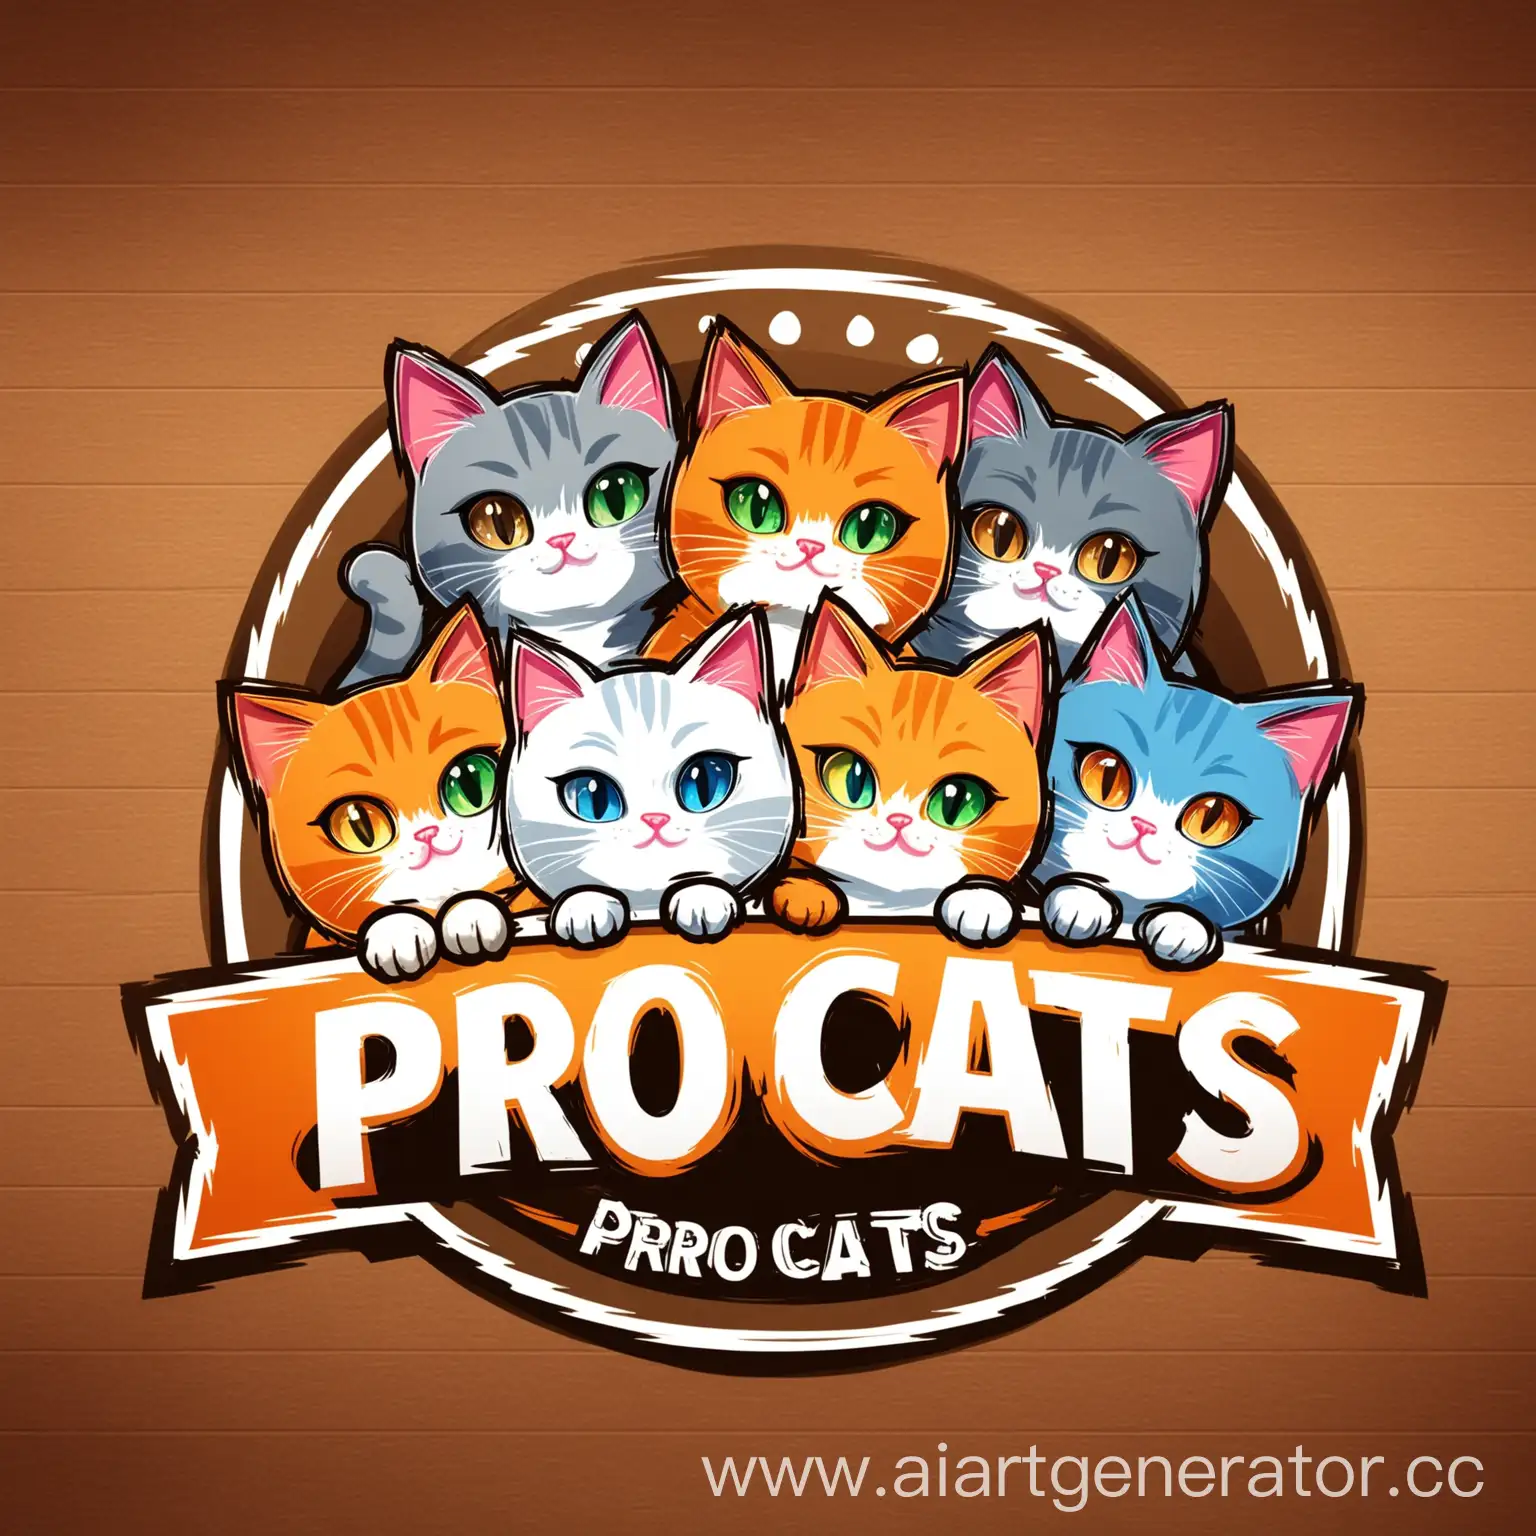 Pro-Cats-Playful-and-Memorable-Logo-for-a-Fun-Cat-Channel